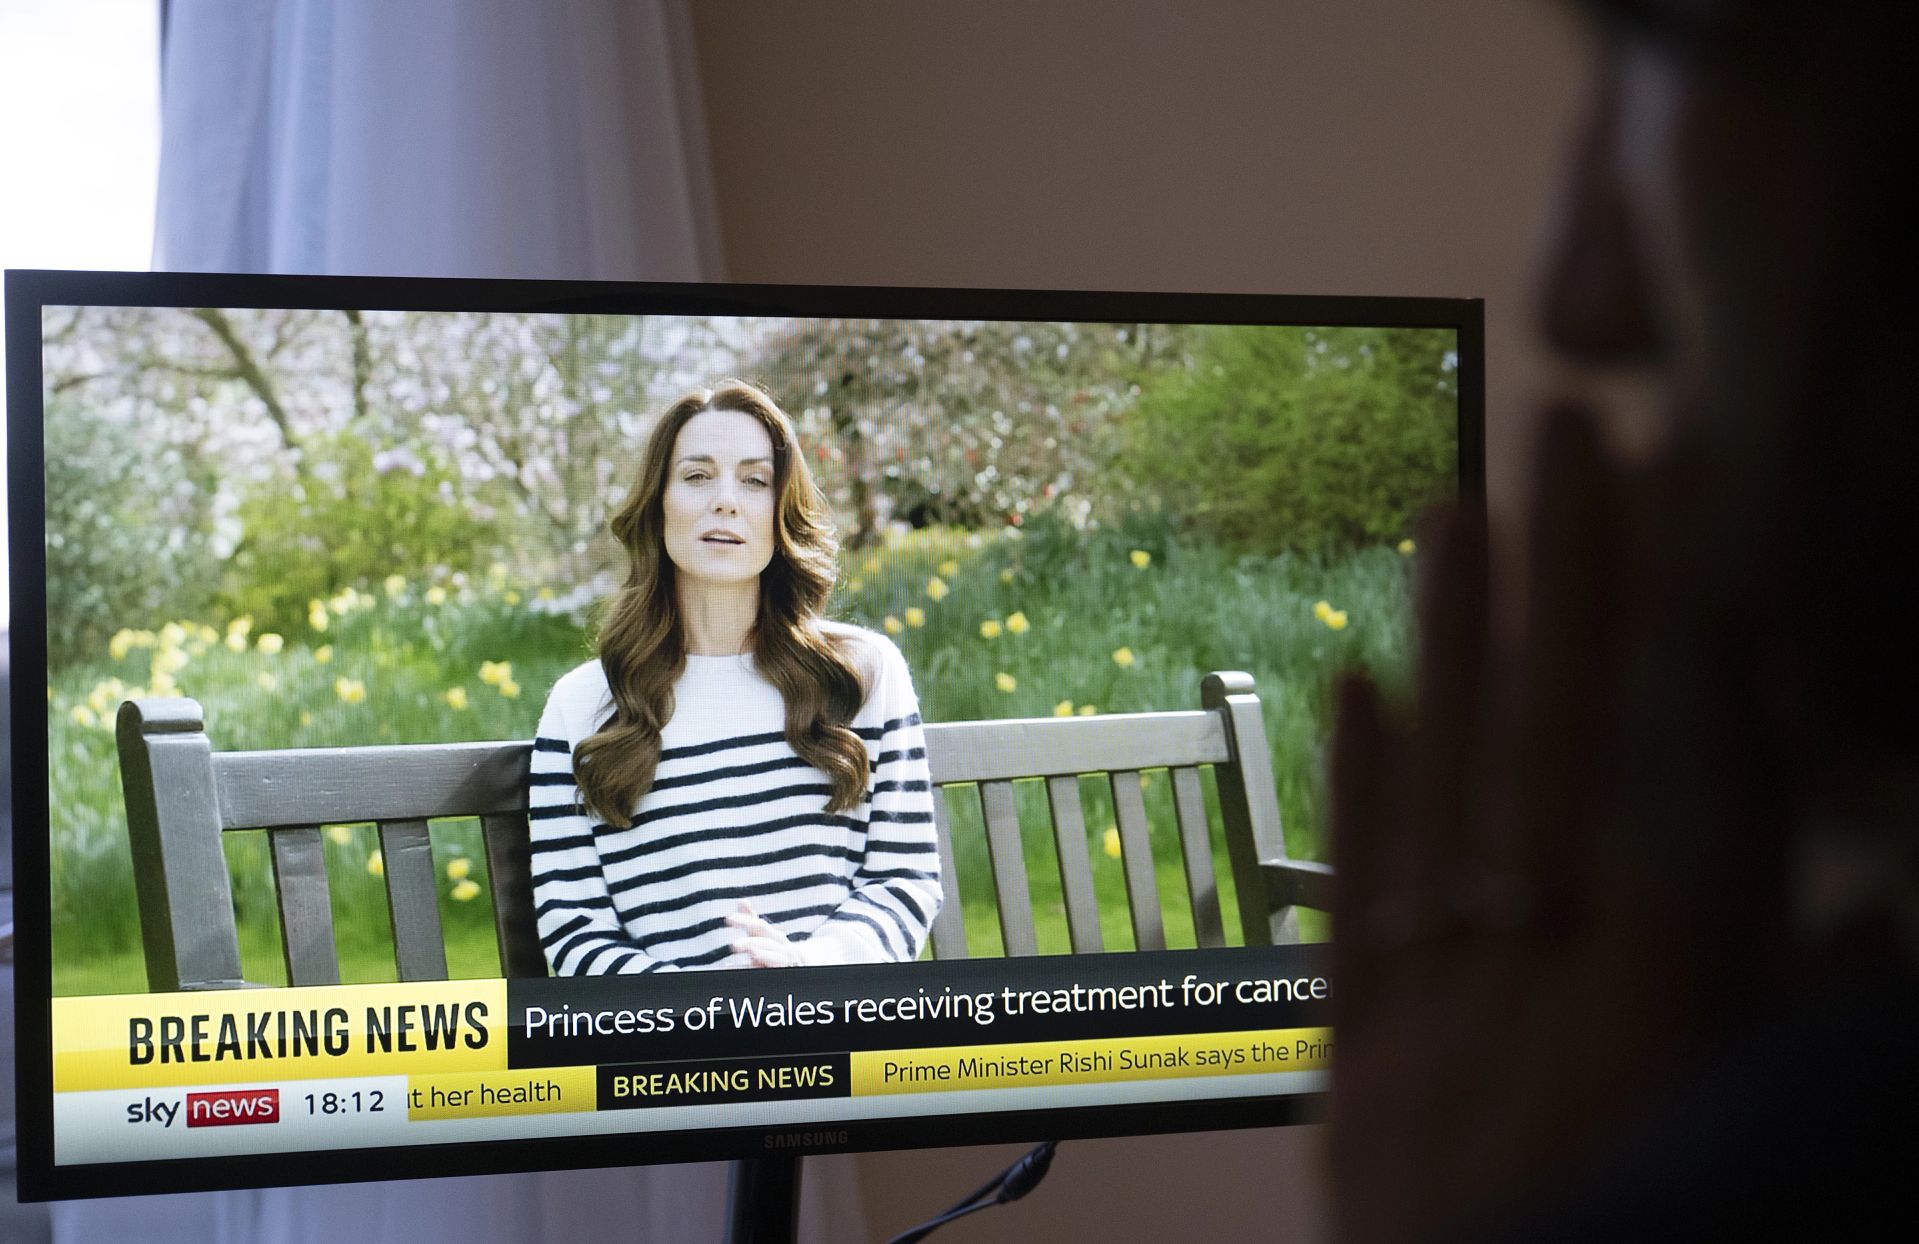 princess kate middleton announces on tv that she has cancer